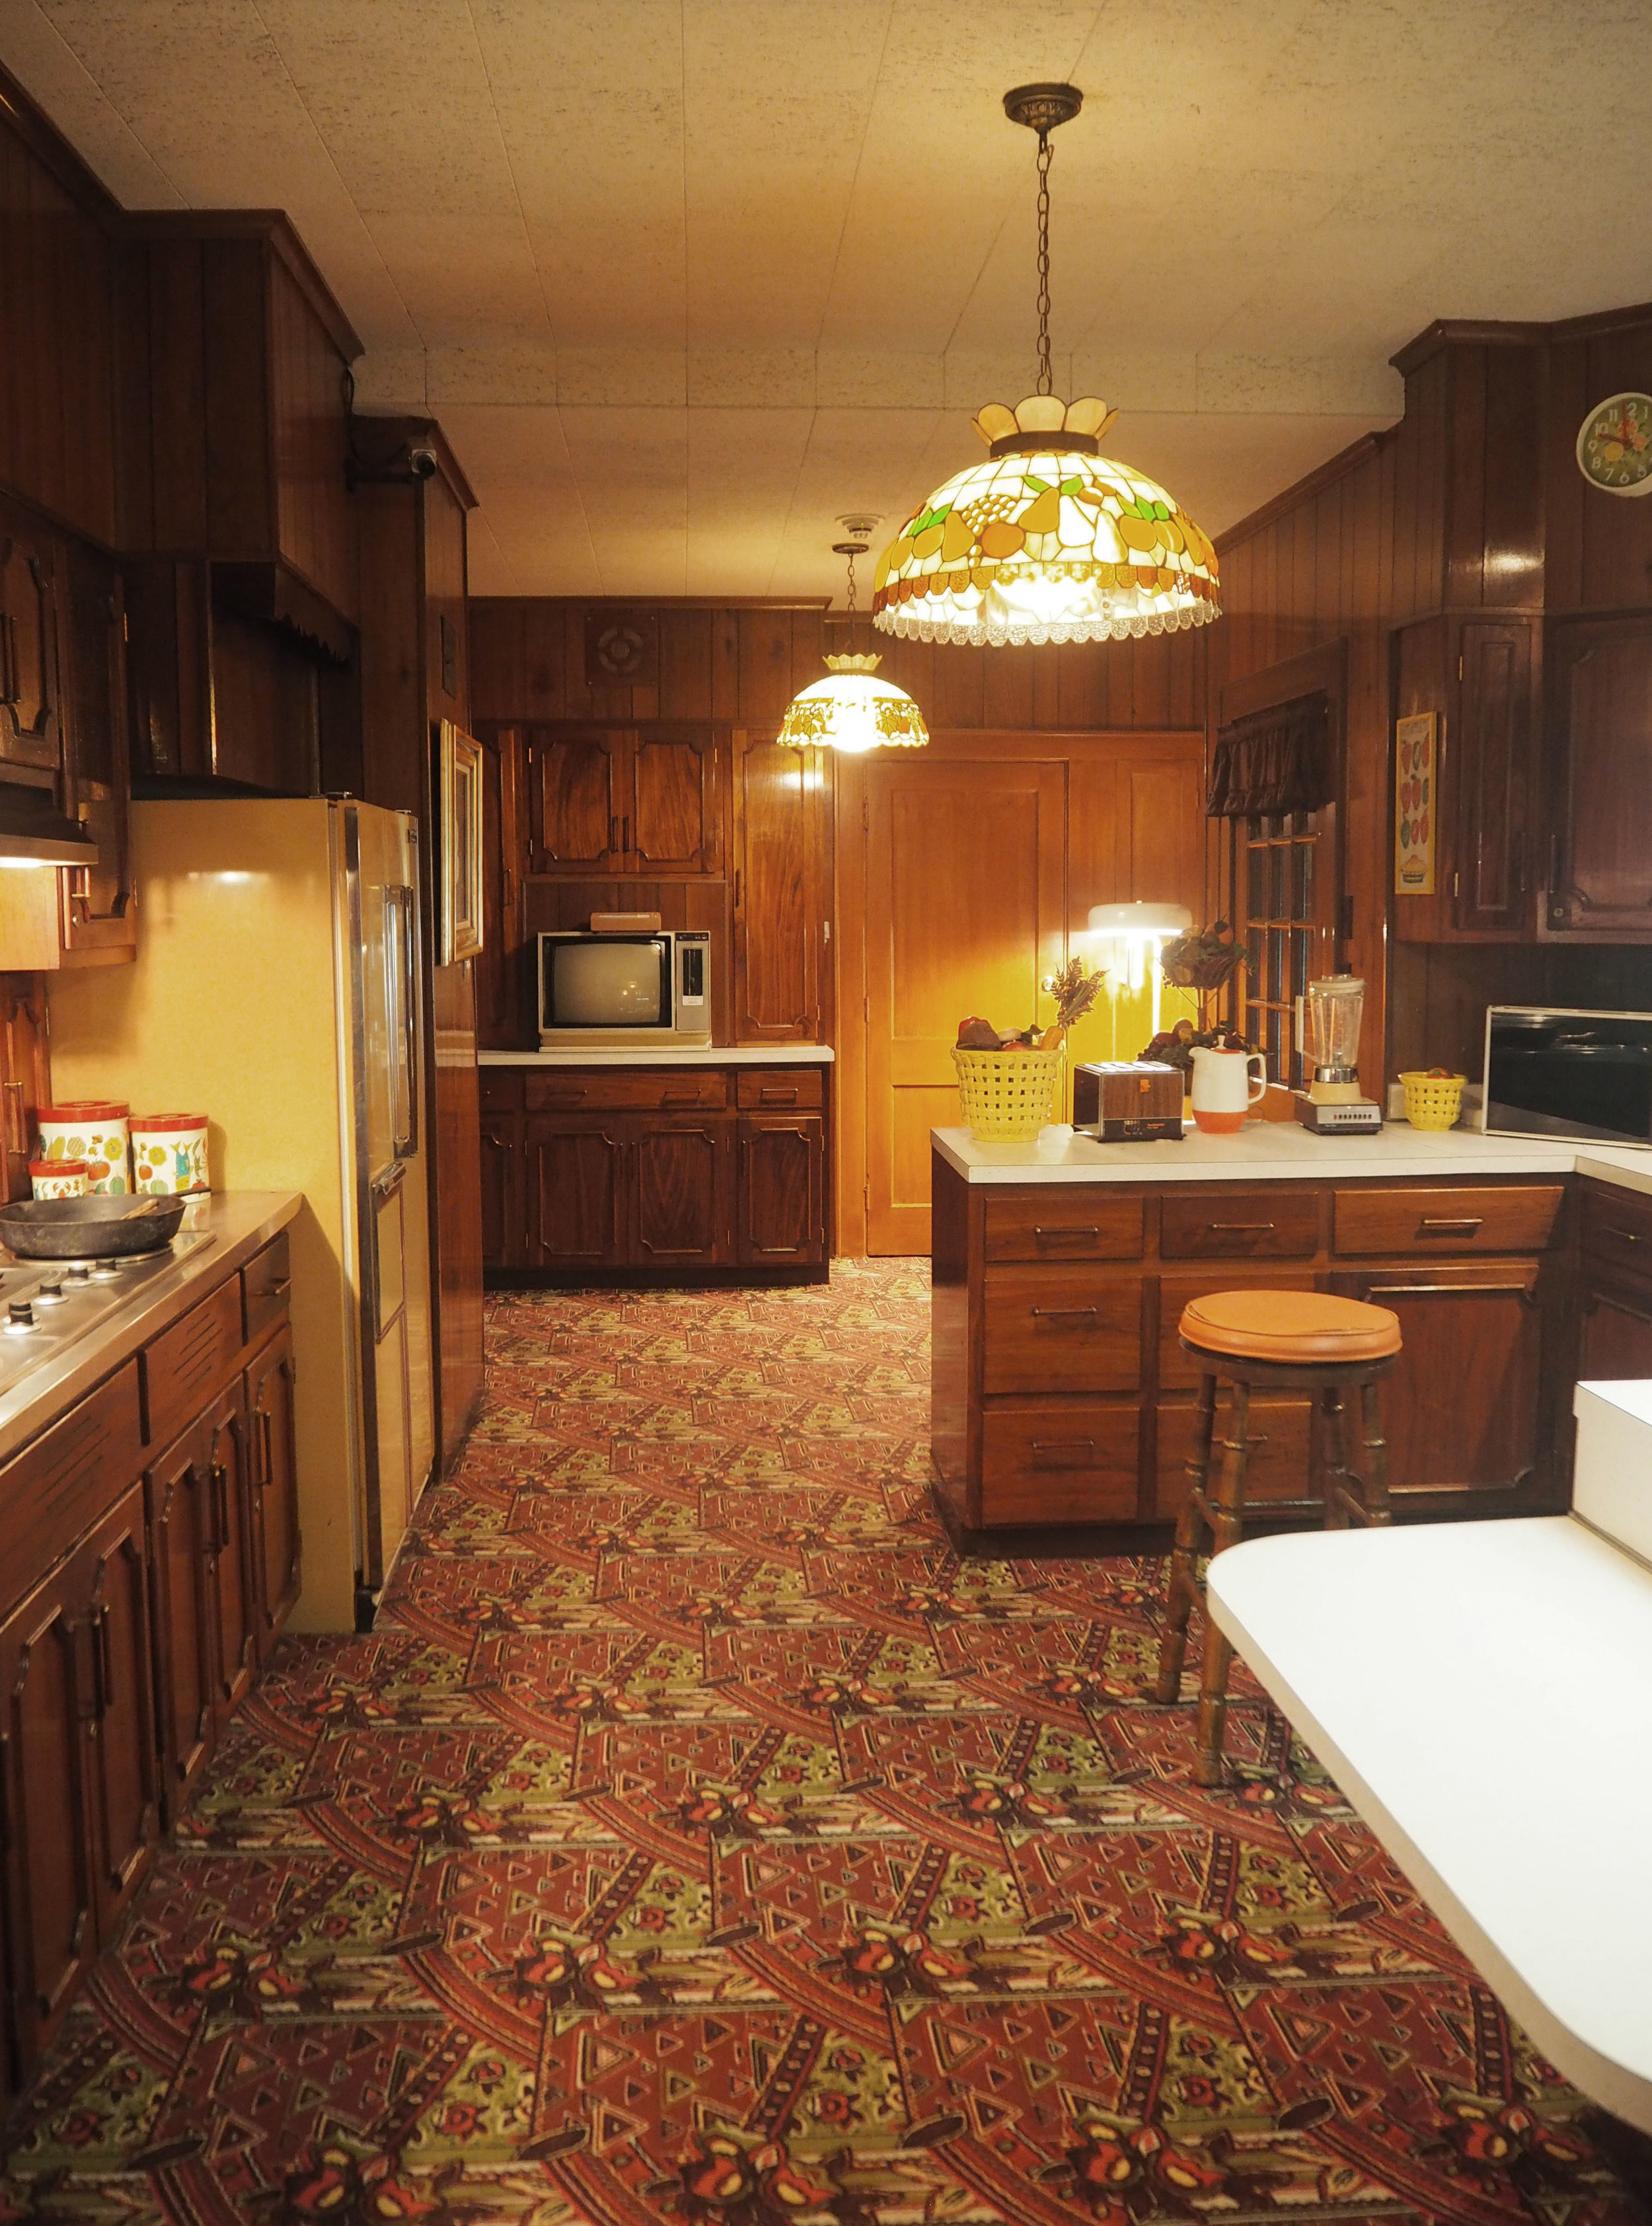 The Kitchen inside Elvis Presley's Graceland. To see more pics, click on the photo. 